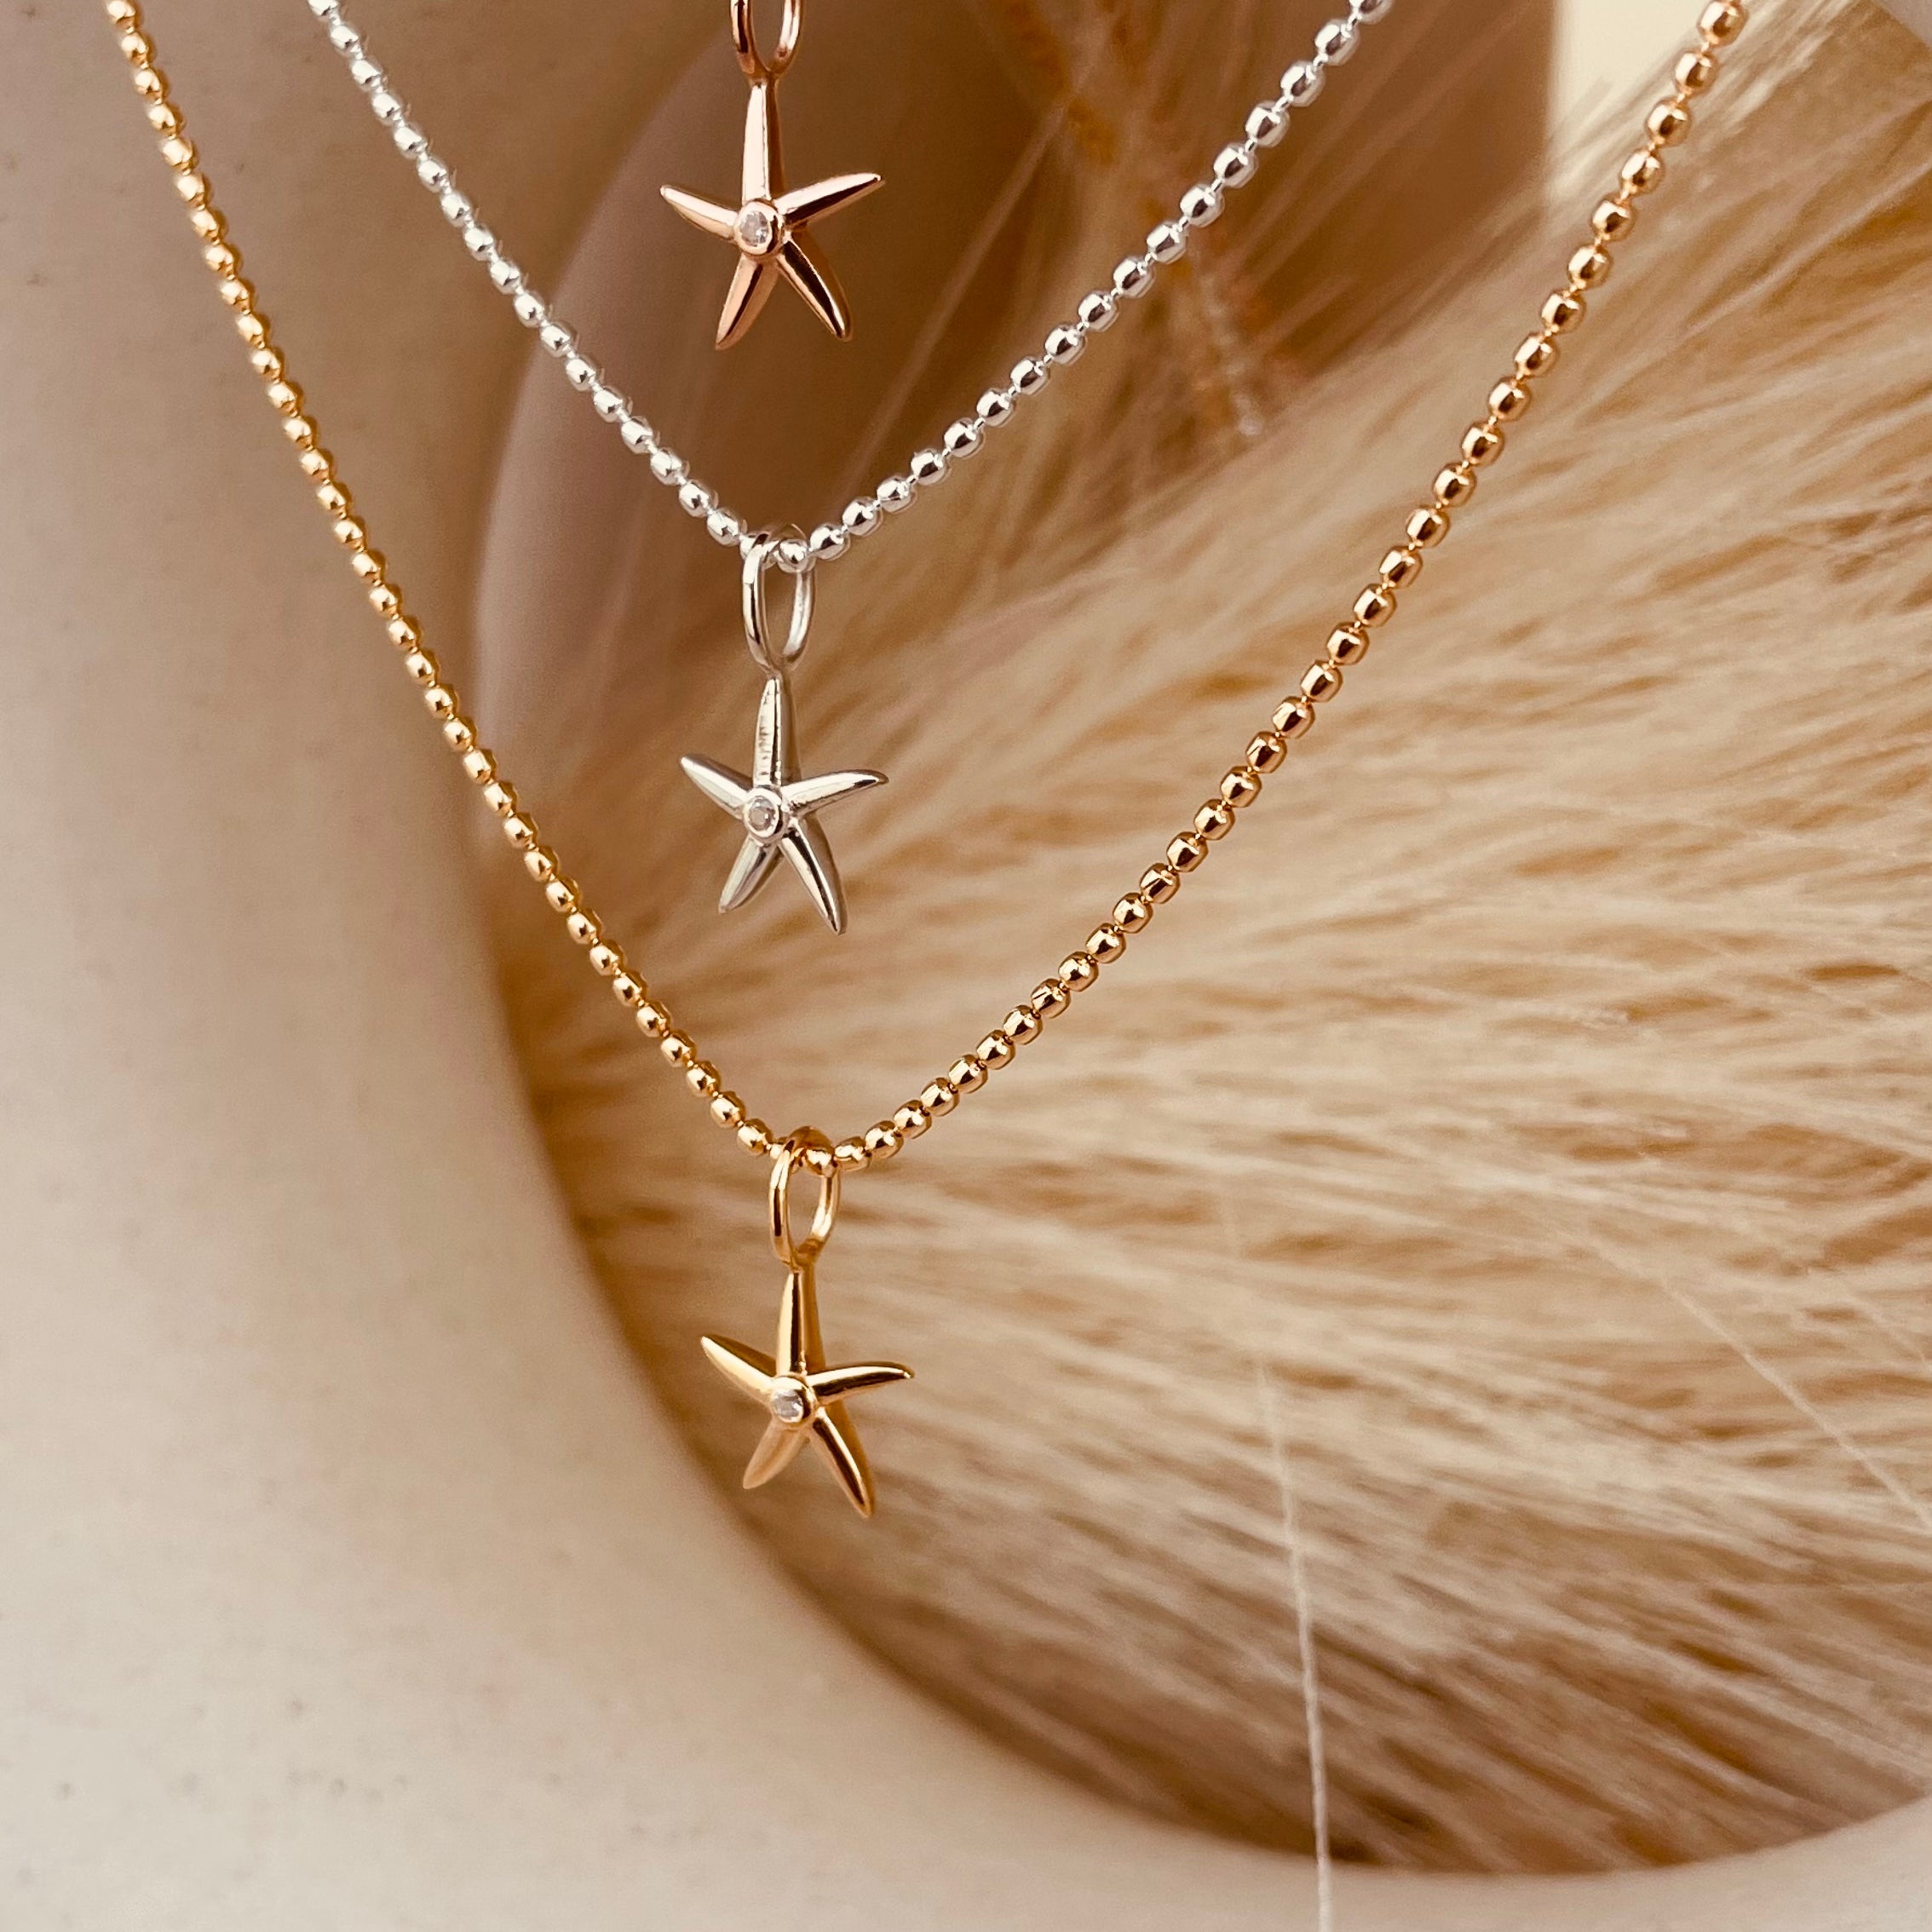 Minimal Starfish Necklace with Beaded Chain - Octonov 